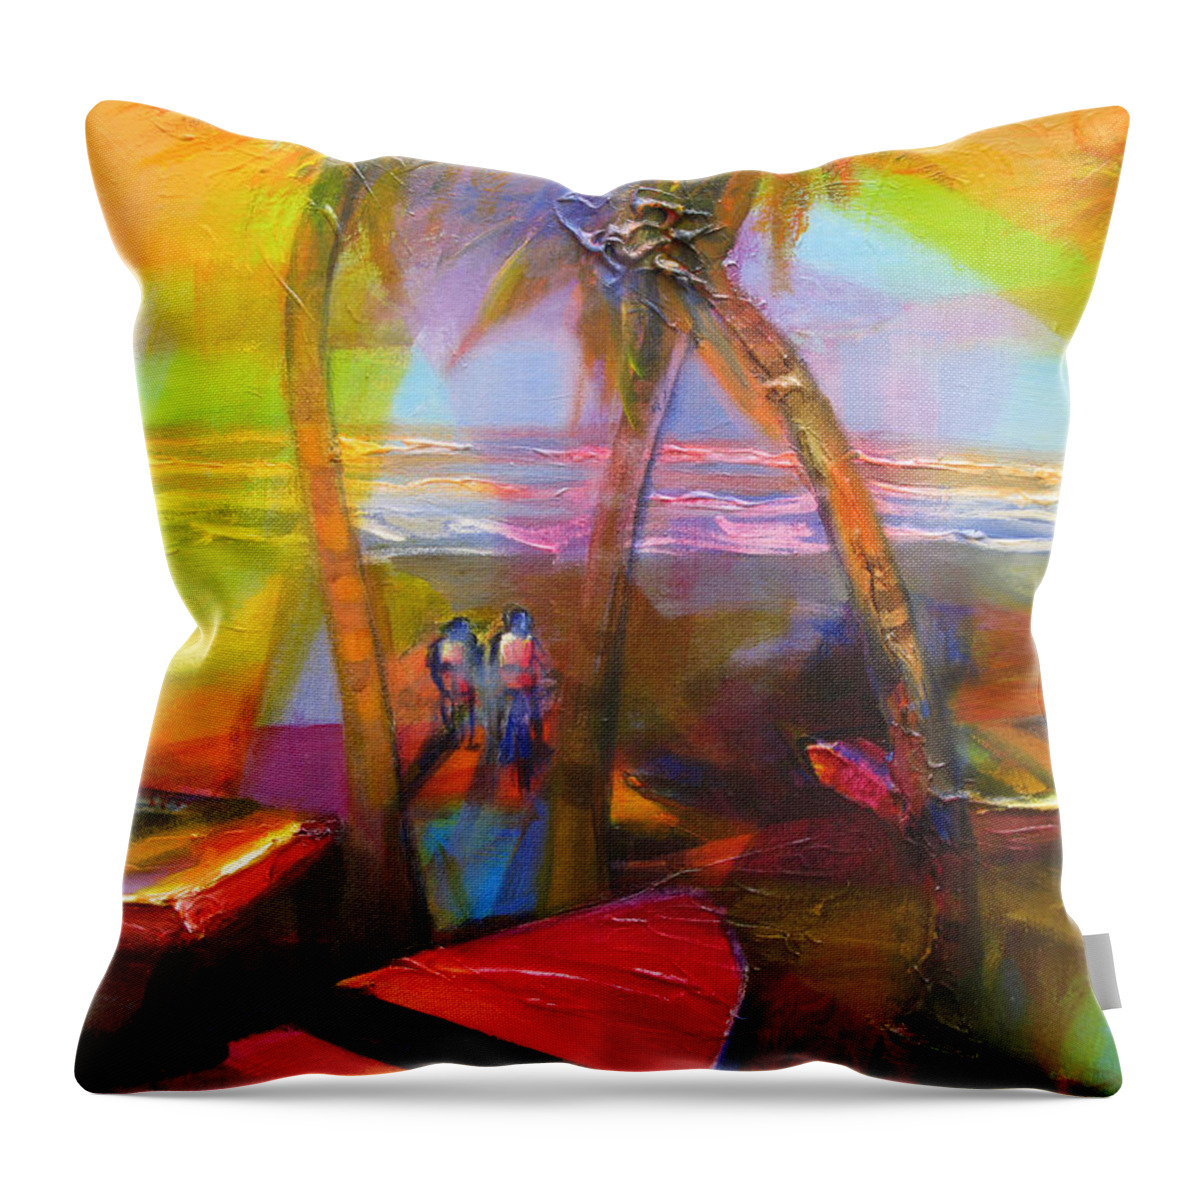 Abstract Throw Pillow featuring the painting Sunset by the Sea by Cynthia McLean